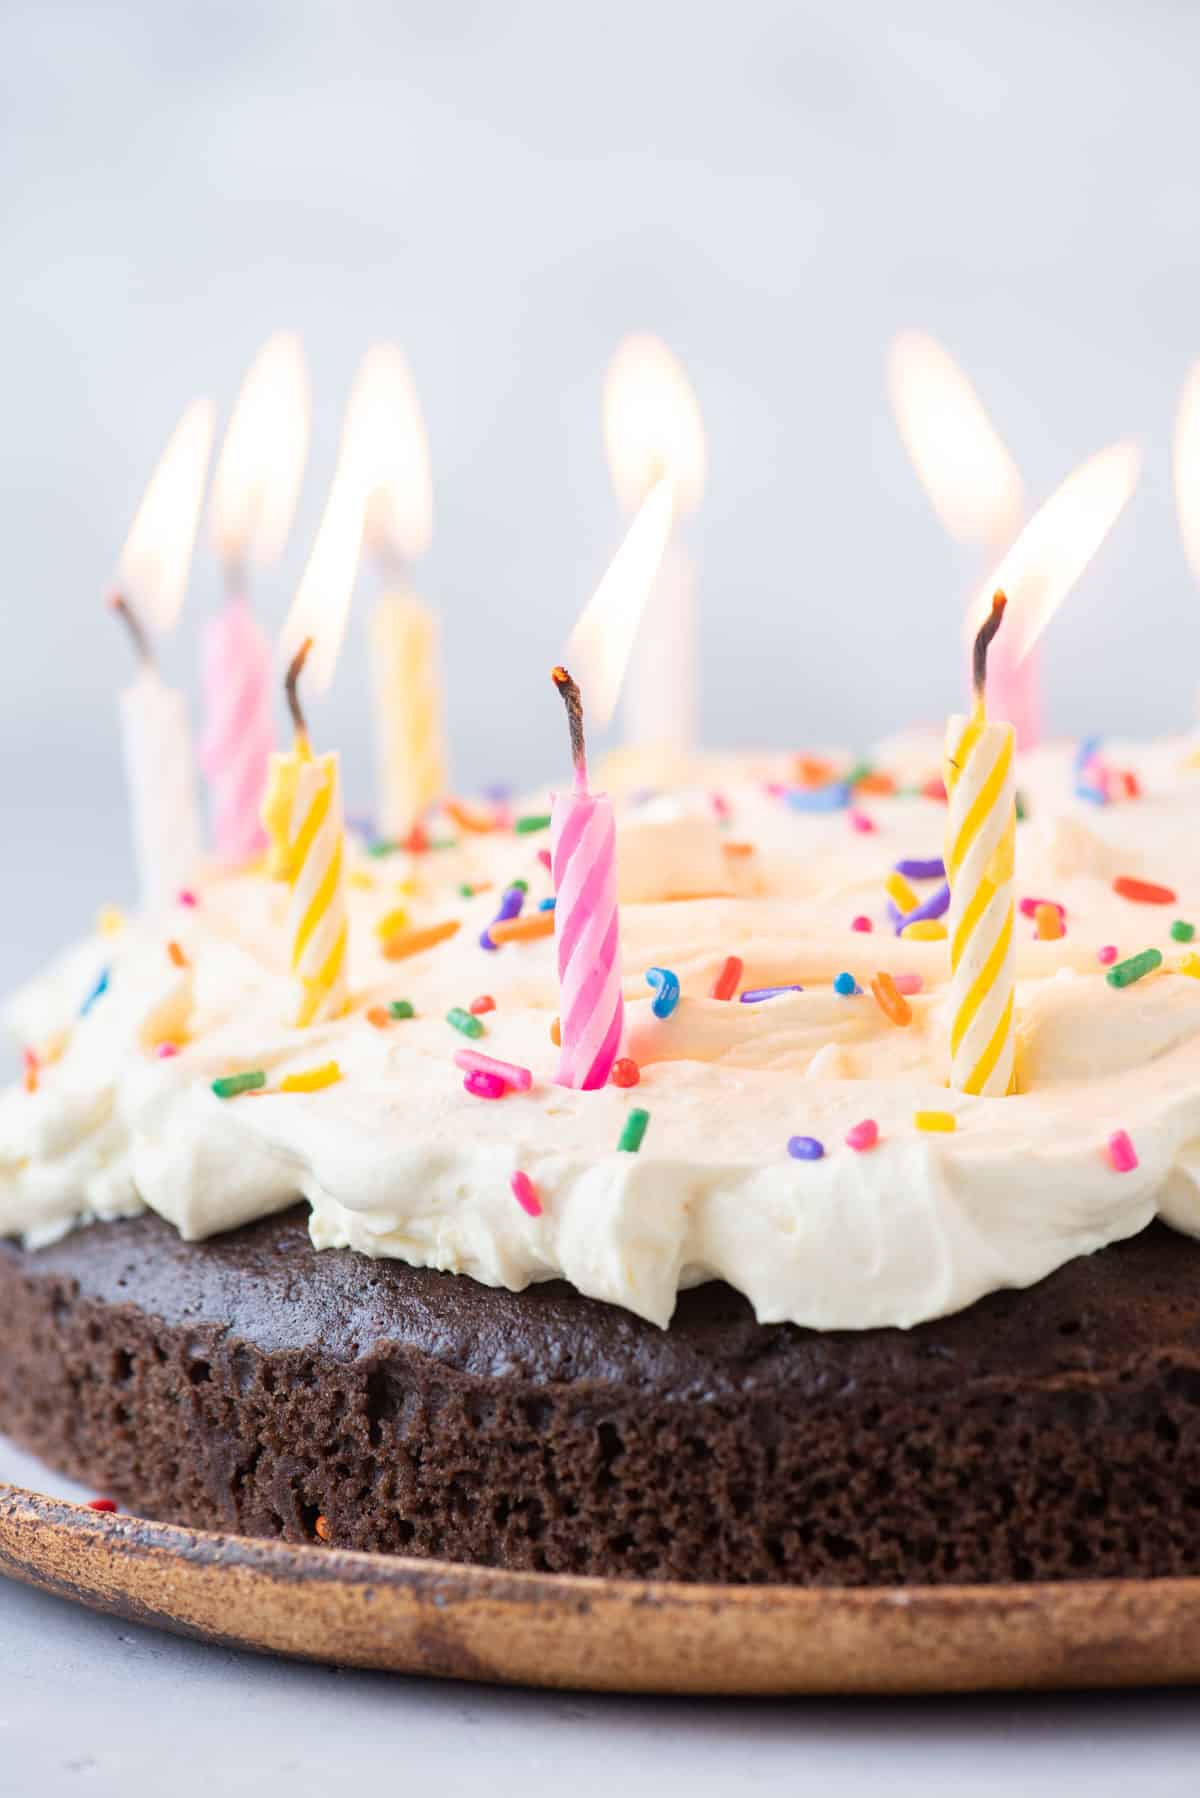 chocolate cake topped with cool whip frosting with sprinkles and lit birthday candles on top